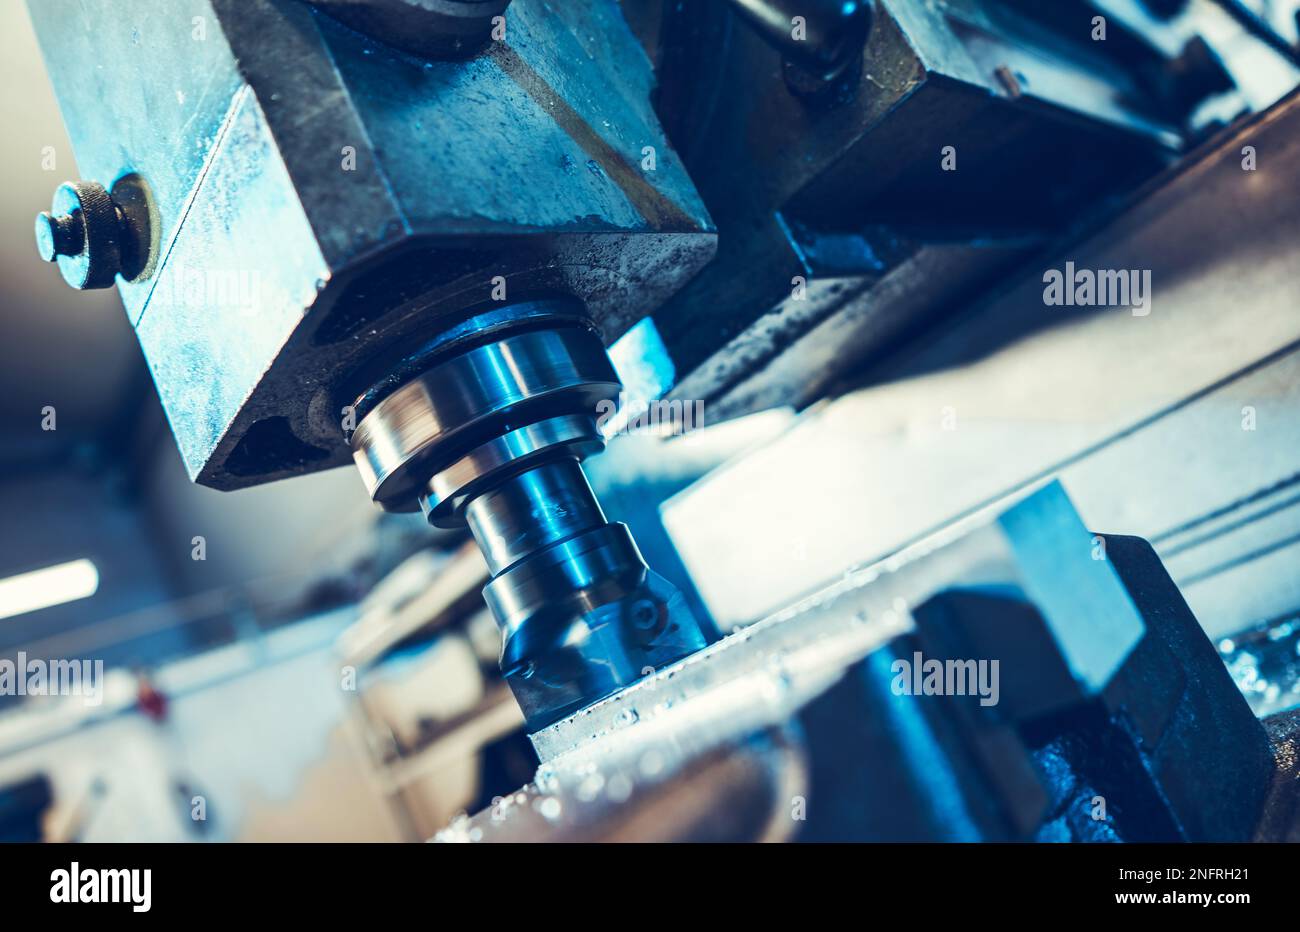 Closeup of Industrial CNC Milling Machine During Machining Process. Production Technology and Manufacturing Equipment Theme. Stock Photo